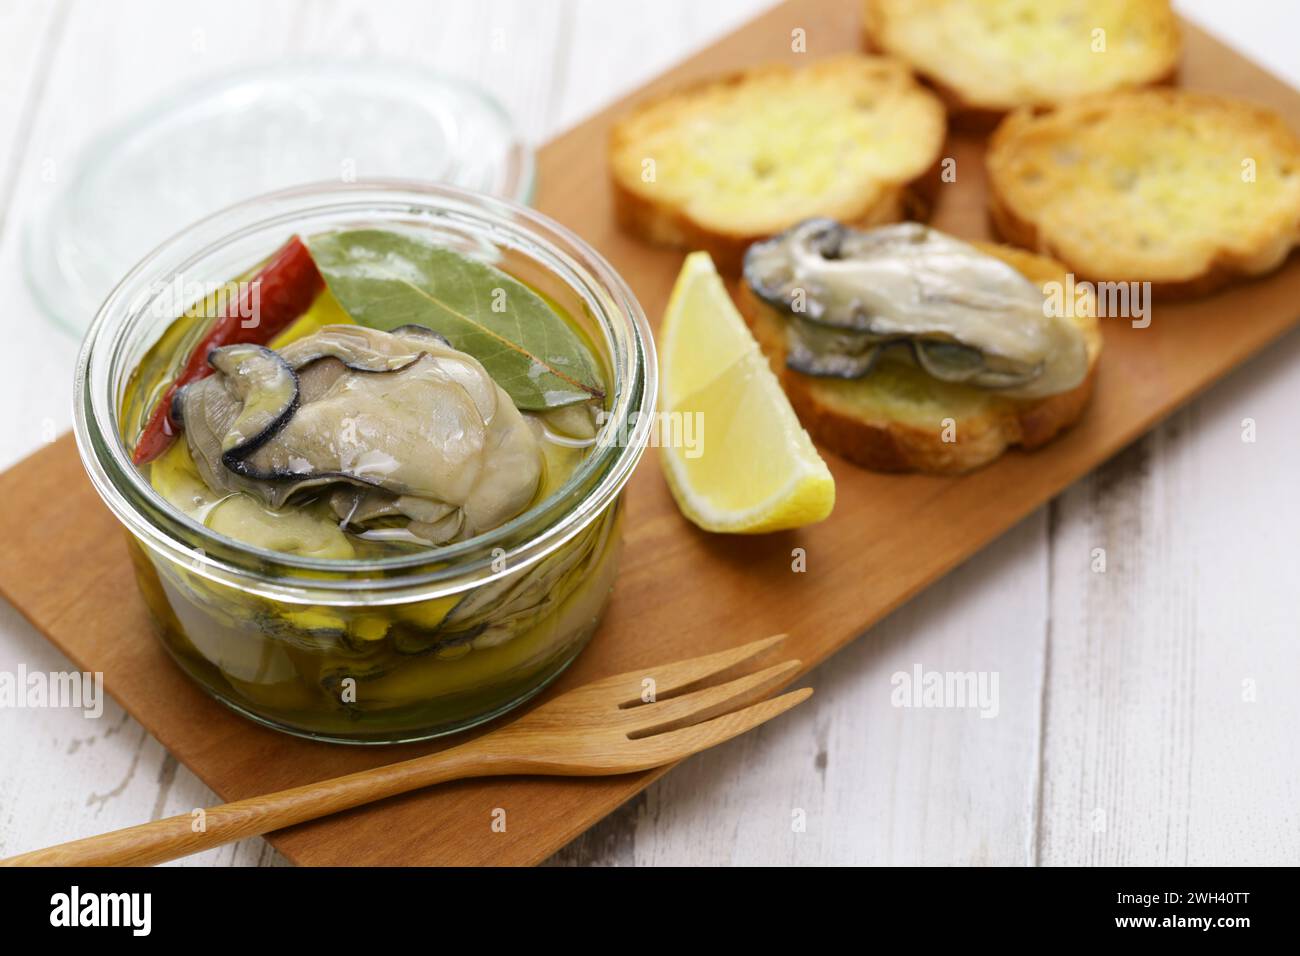 homemade marinated oysters in olive oil, Japanese food Stock Photo